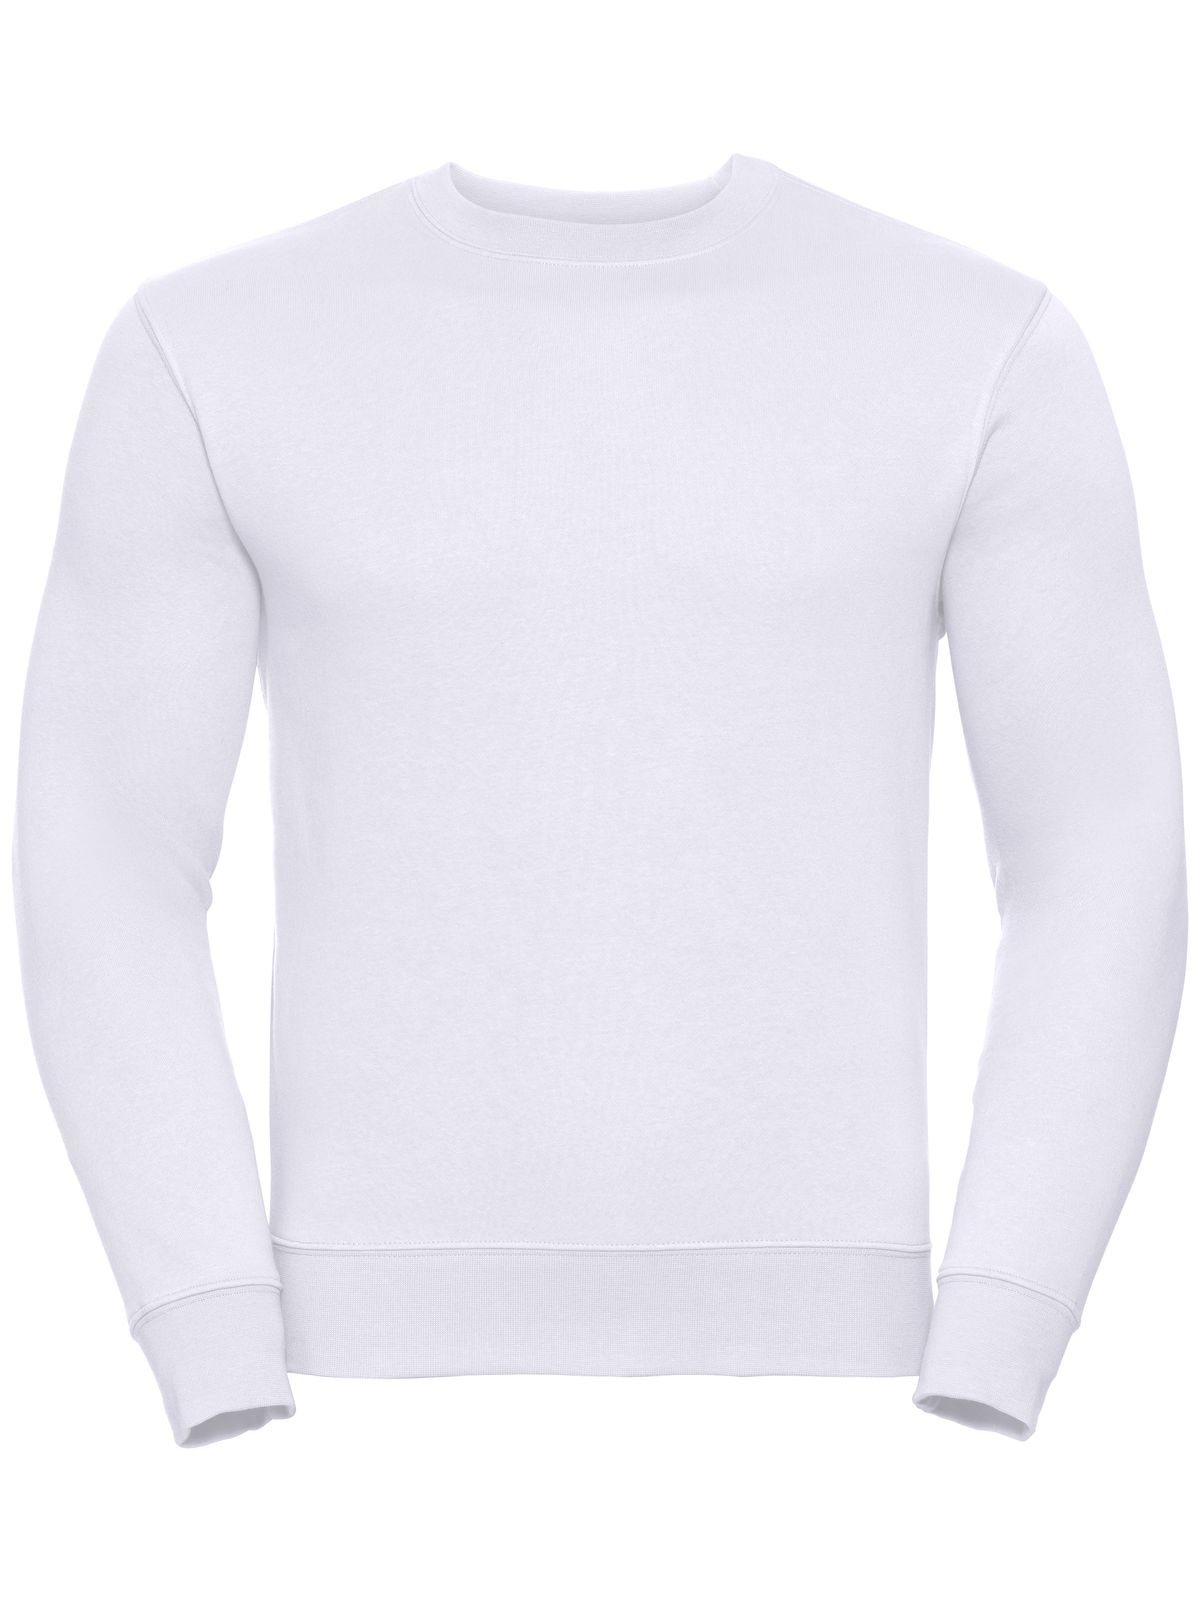 adults-authentic-sweat-white.webp